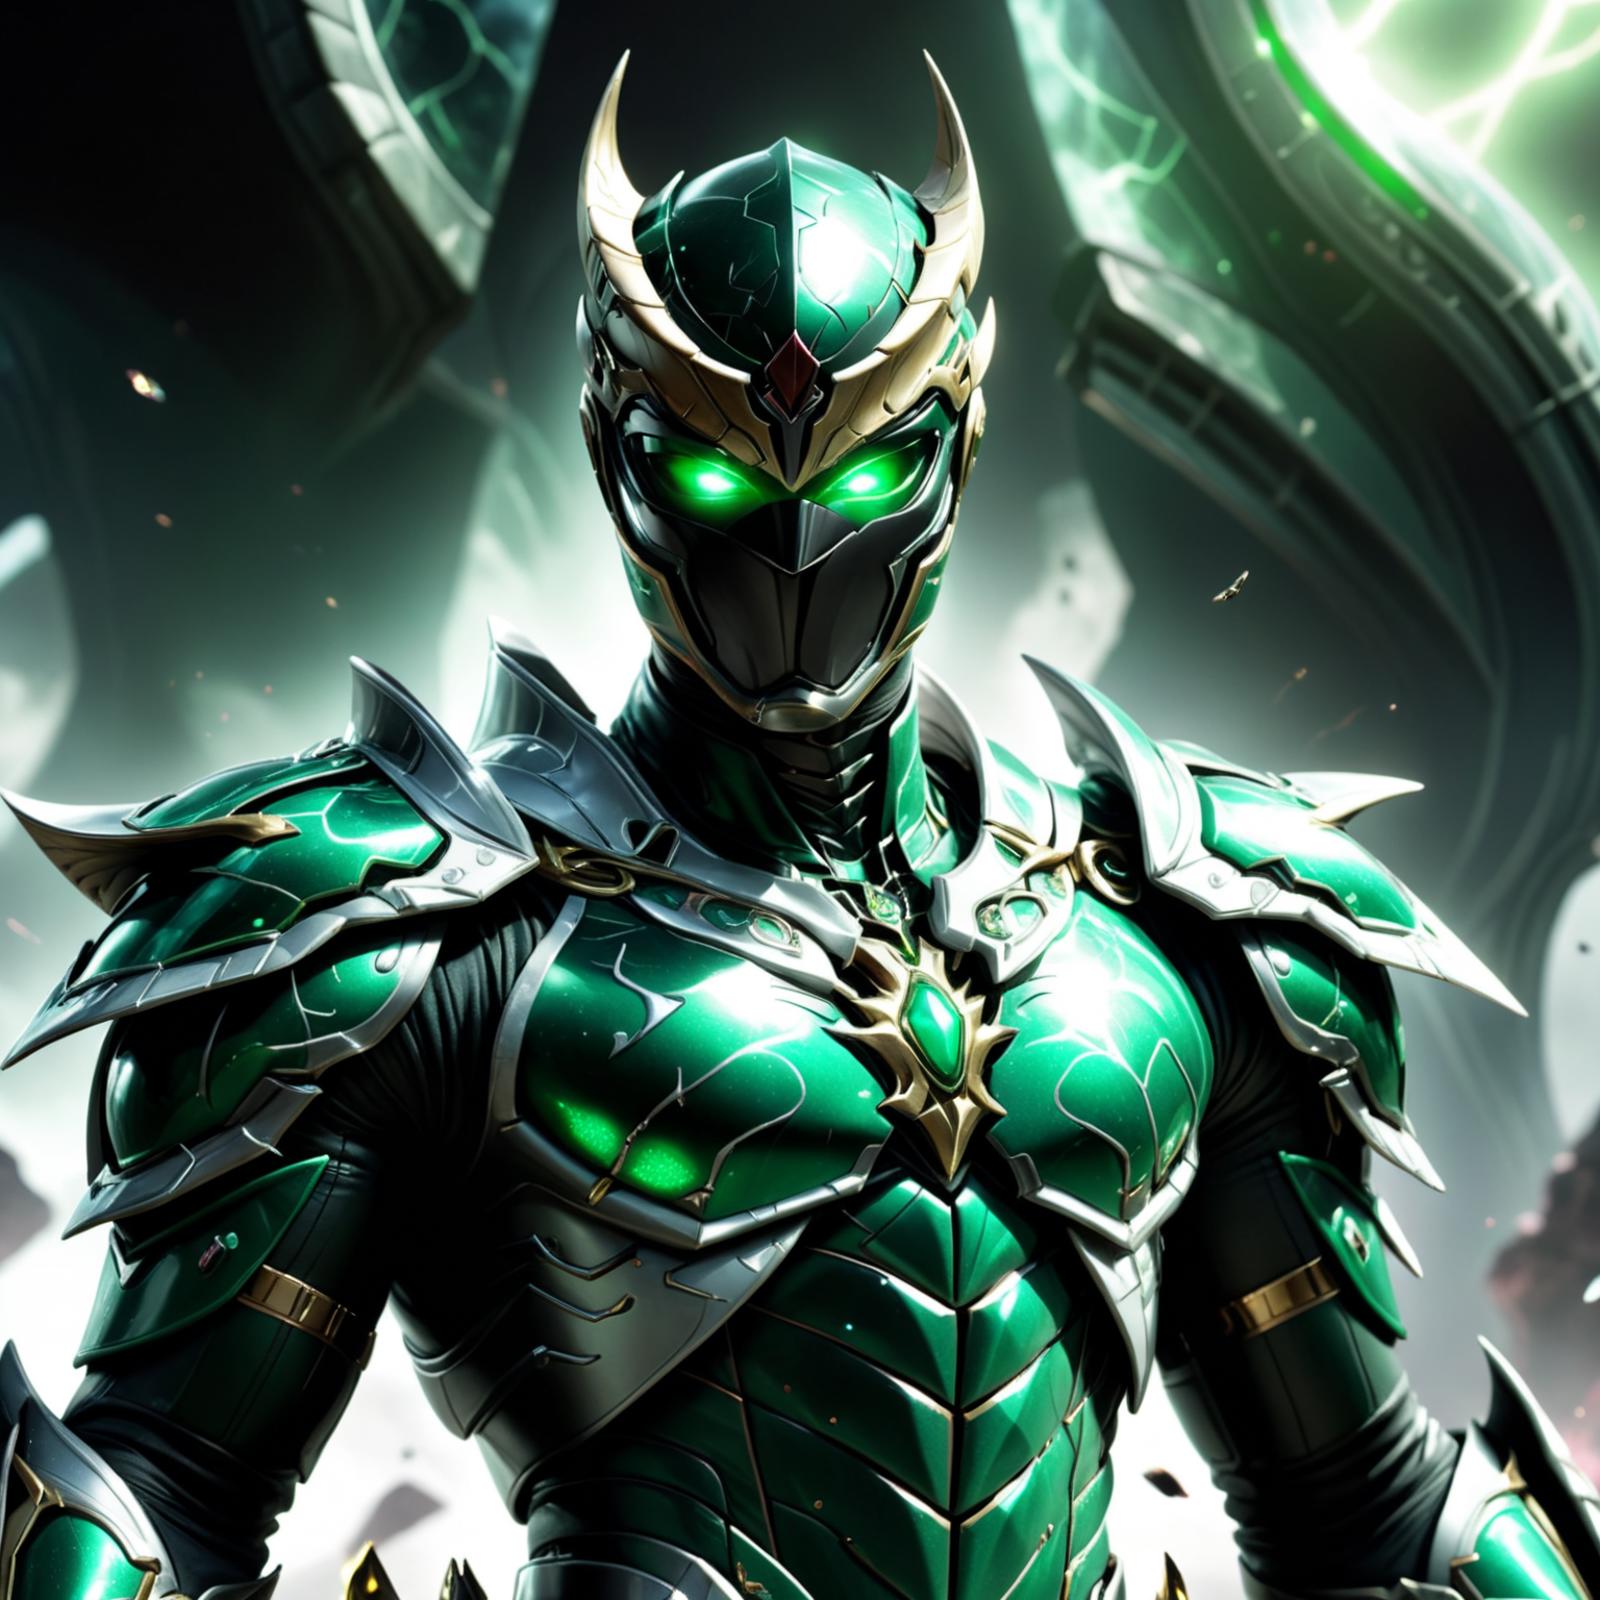 Green Power Ranger - Mighty Morphing Power Rangers image by Ai_Artdreamer